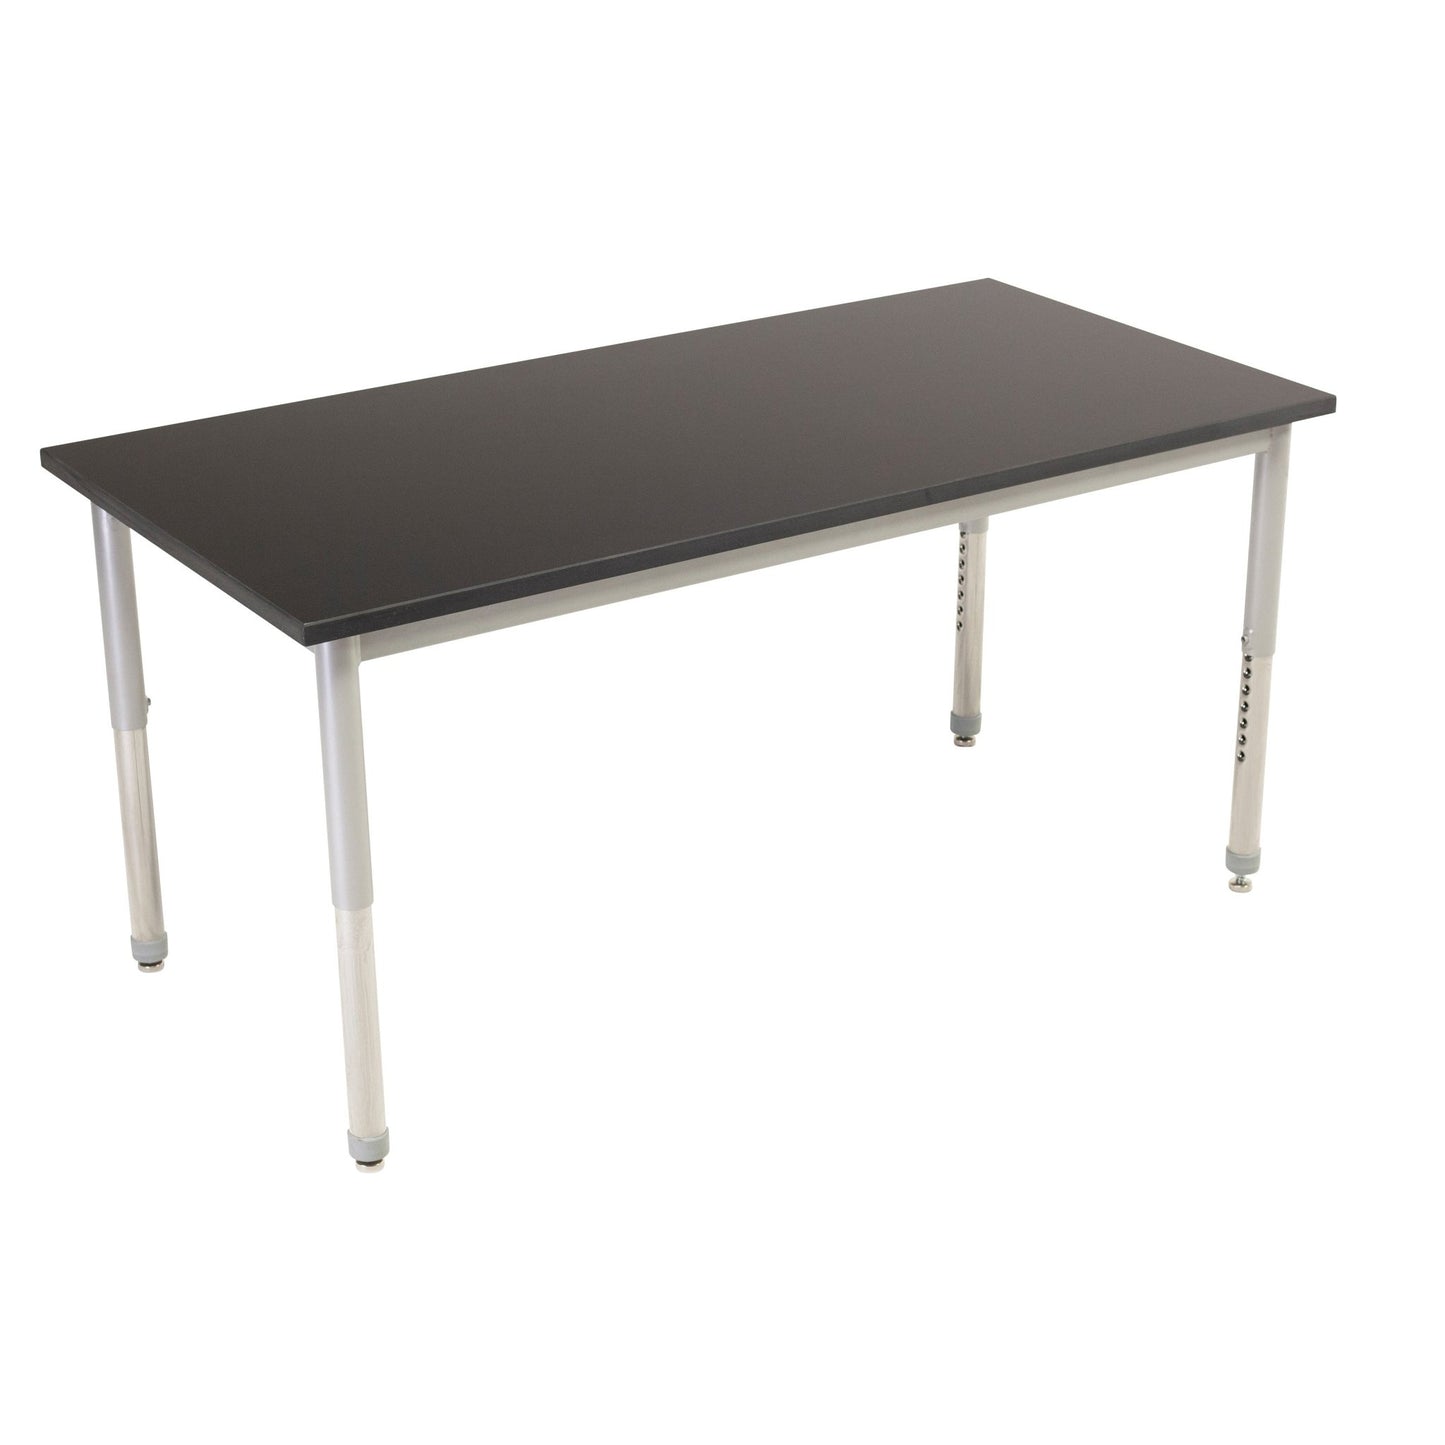 AmTab Science Lab Table - 30"W x 72"L x Adjustable Height 30" to 38" - Phenolic Resin Chem Res Top (AMT-SCI306PR) - SchoolOutlet